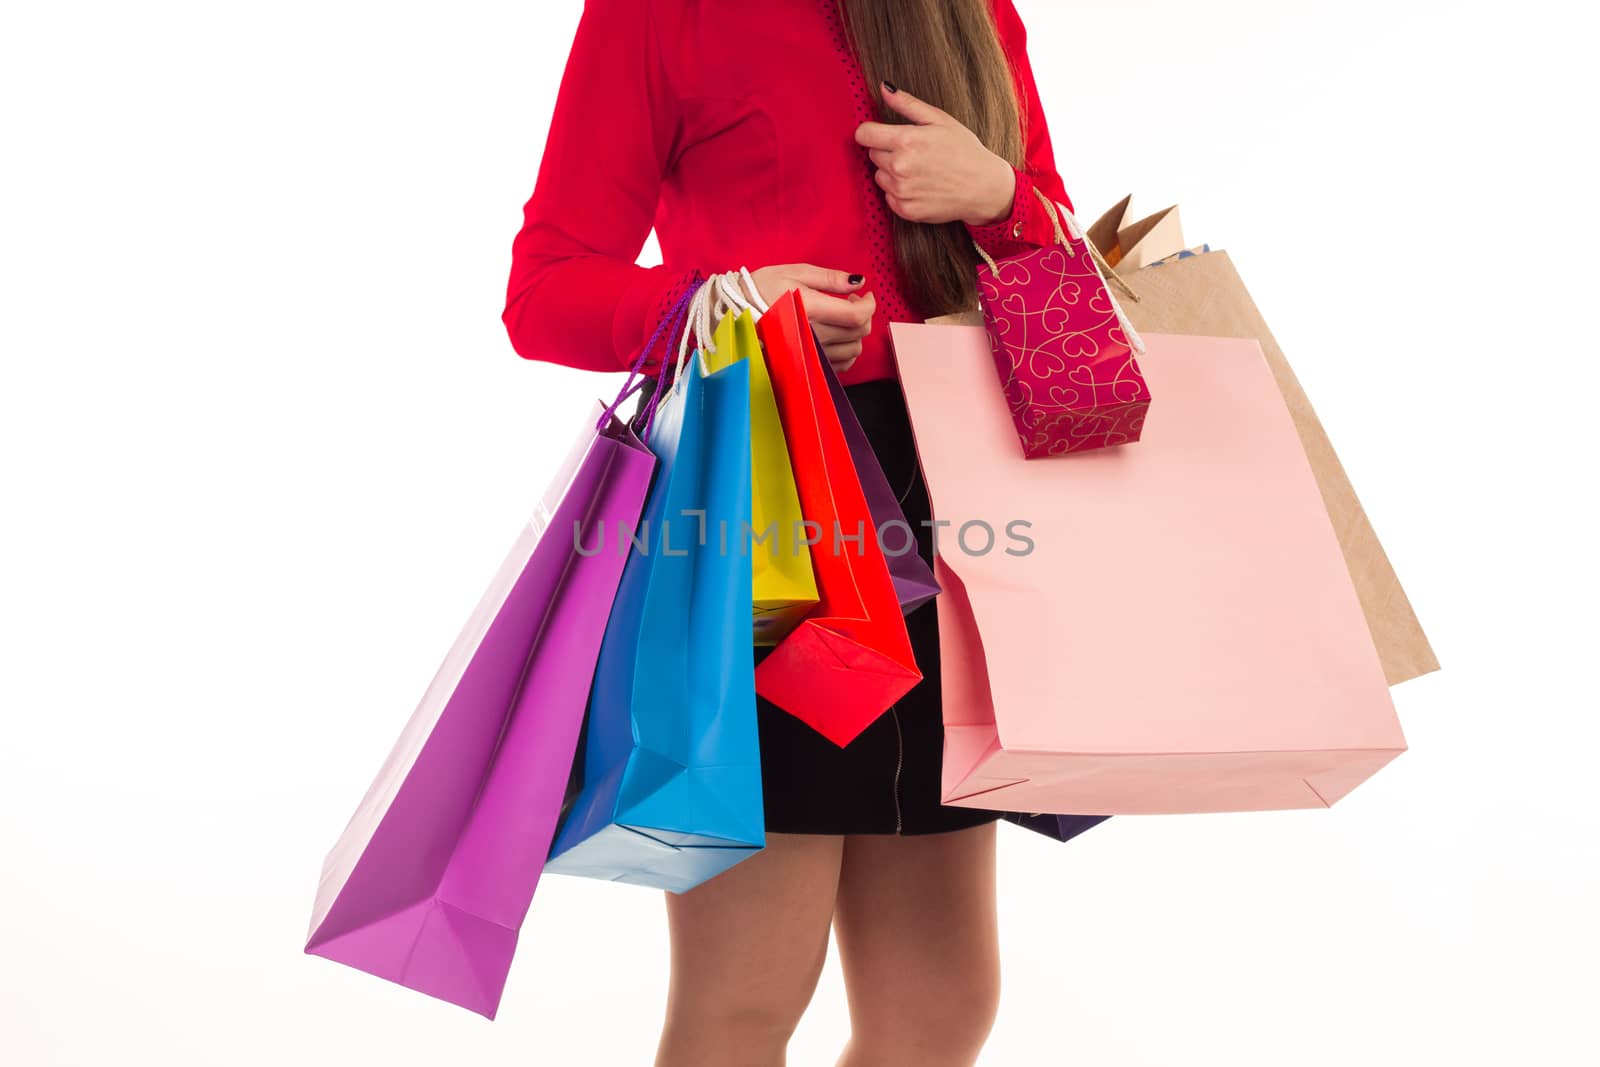 Woman holds her purchases, many colorful paper bags, packages, in her arms after shopping